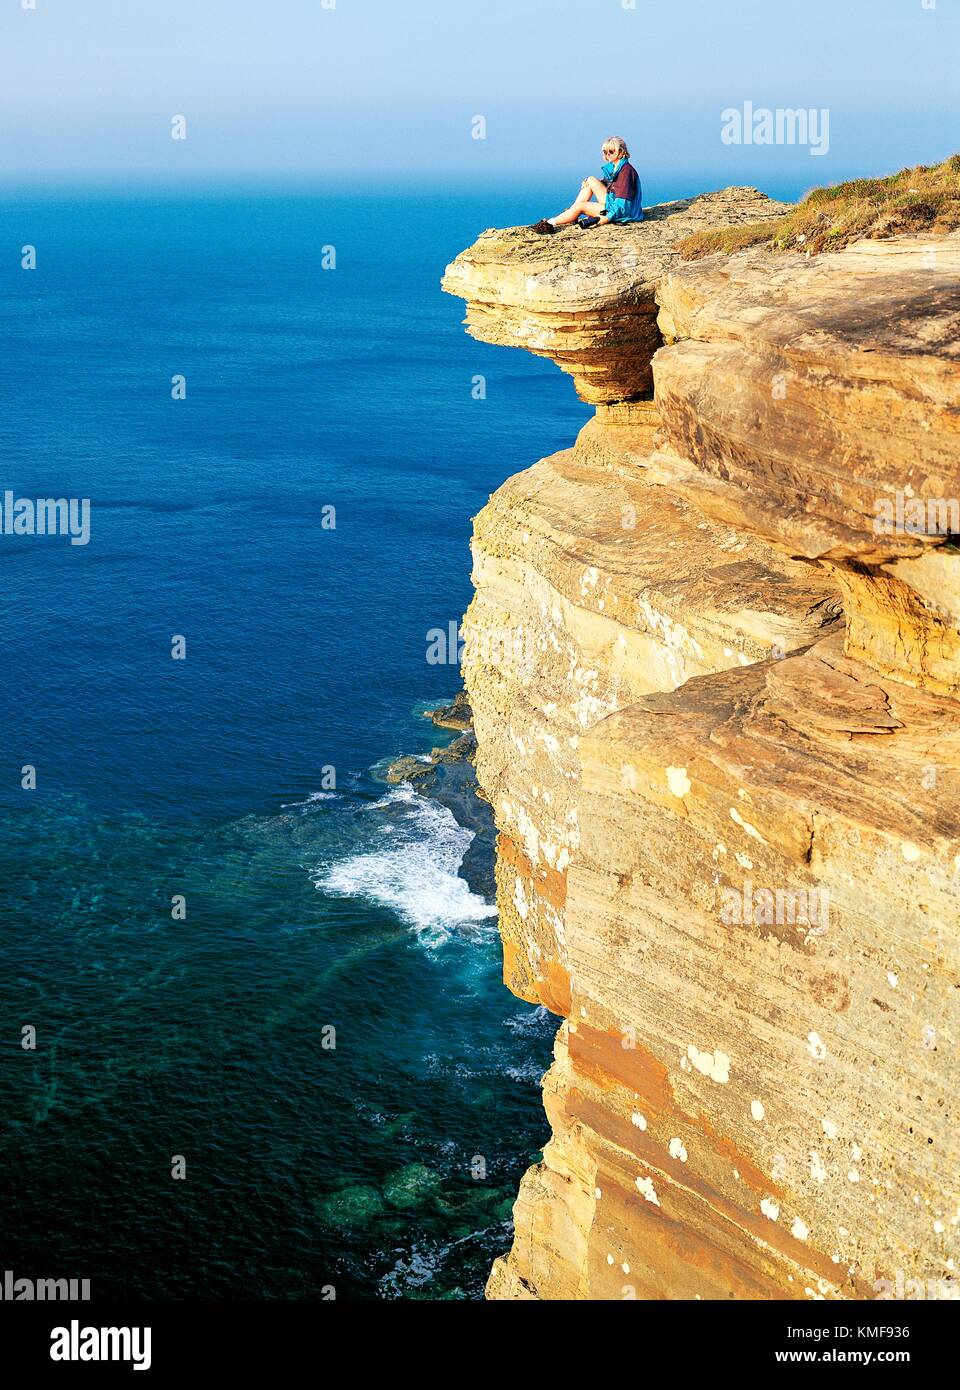 Young woman sitting on cliffs of Dunnet Head above Pentland Firth on north coast of Caithness in Highland region of Scotland Stock Photo